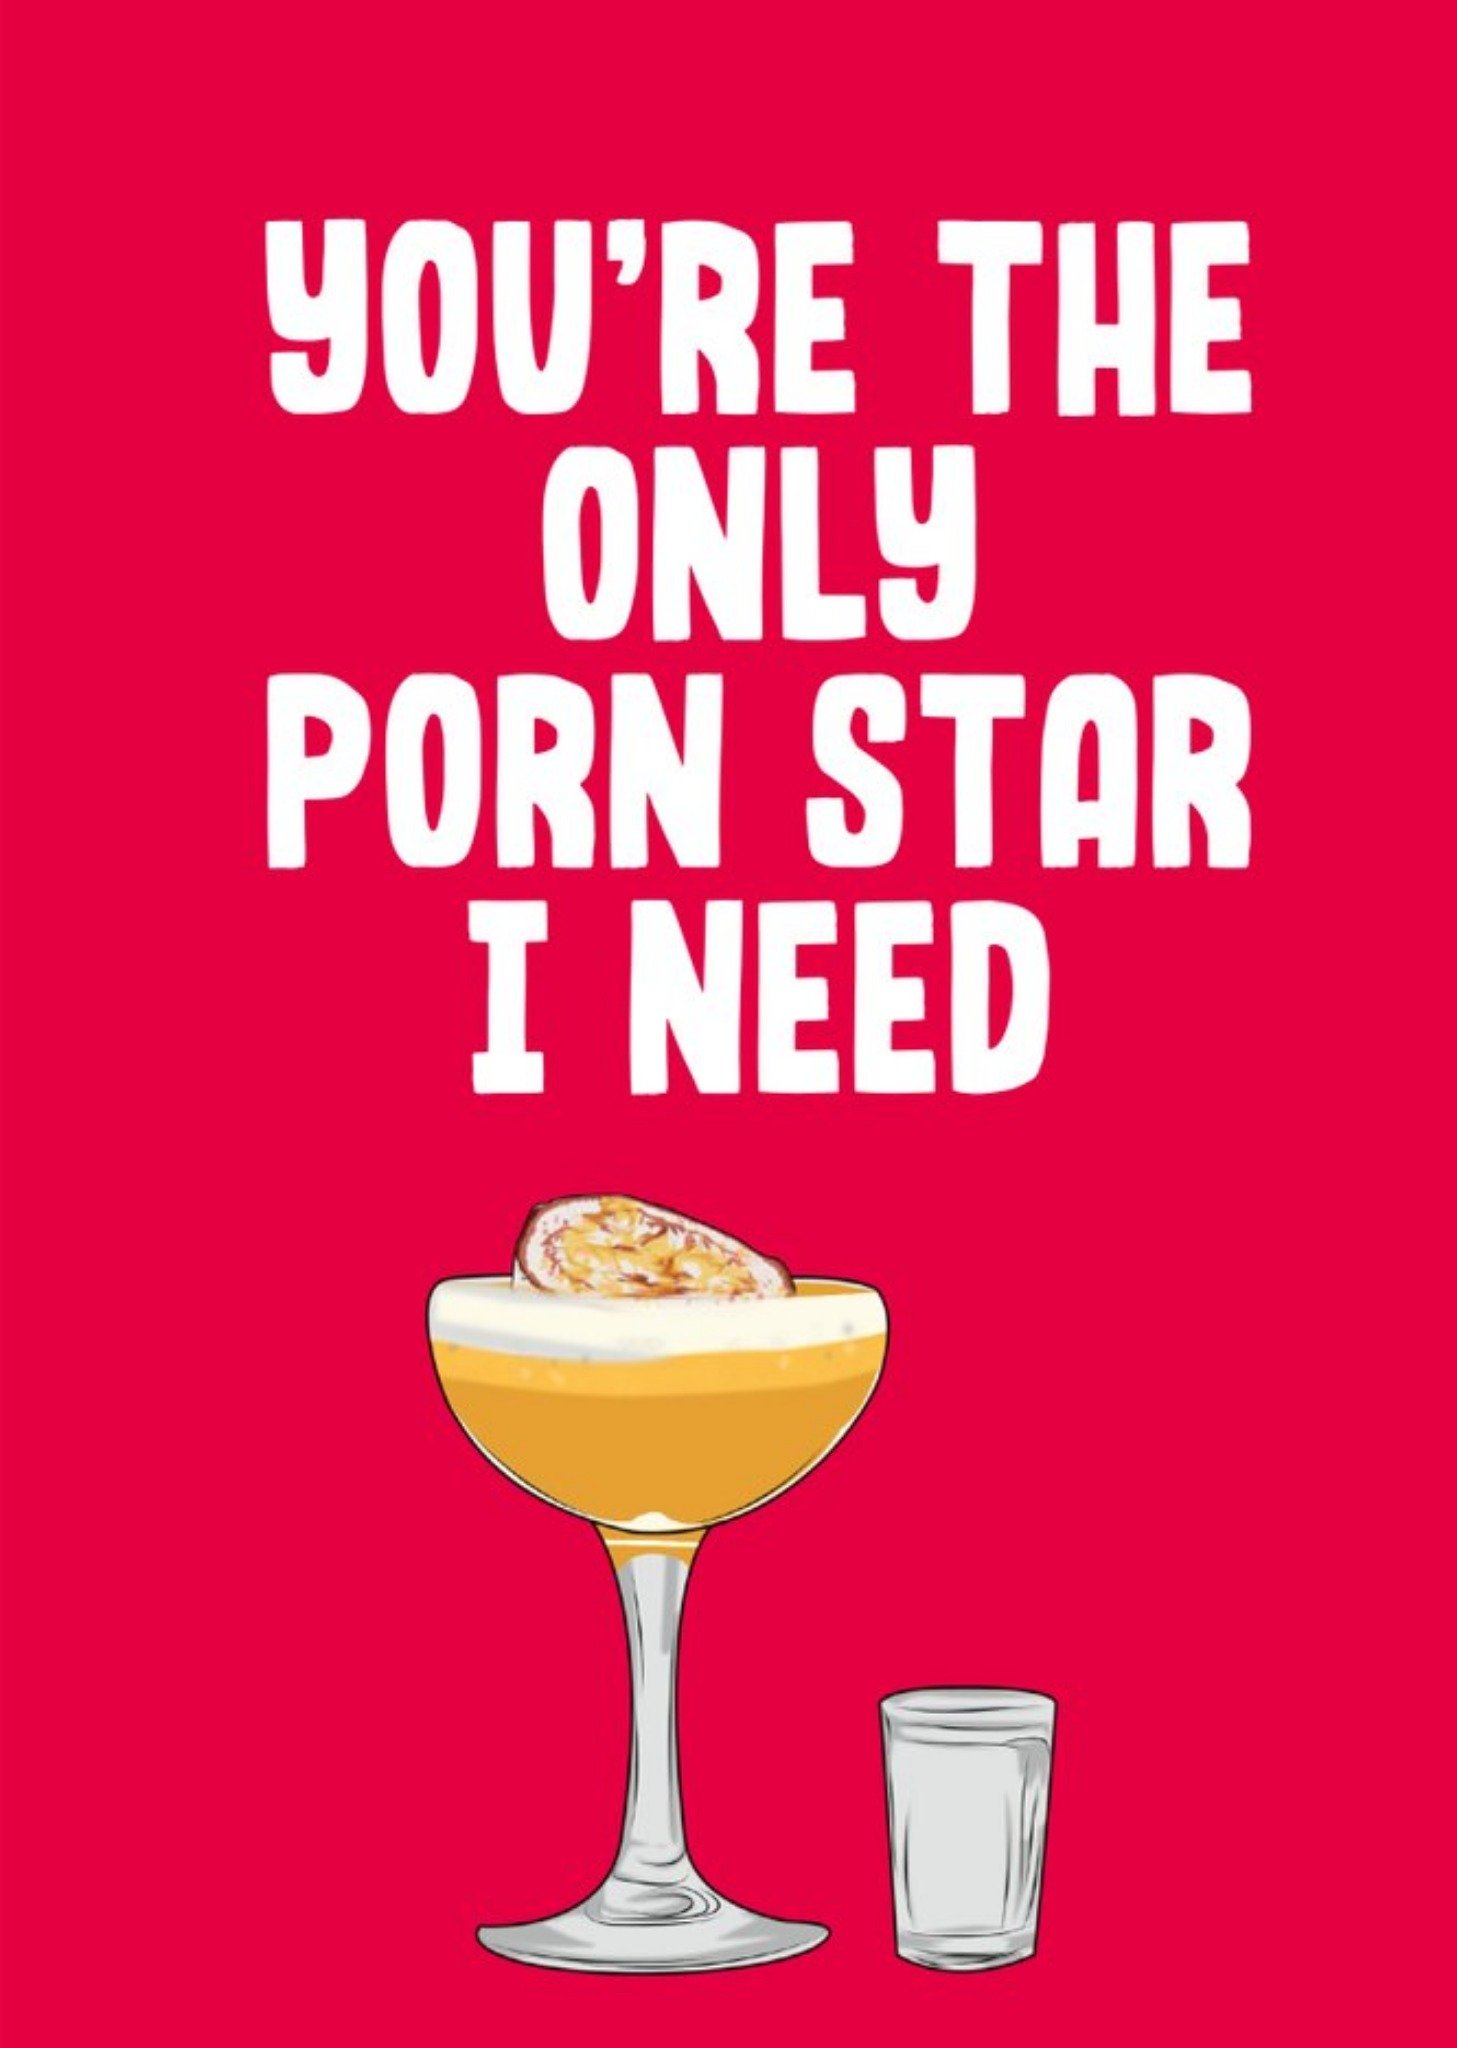 Filthy Sentiments Illustration Of A Porn Star Cocktail Funny Valentine's Day Card, Large